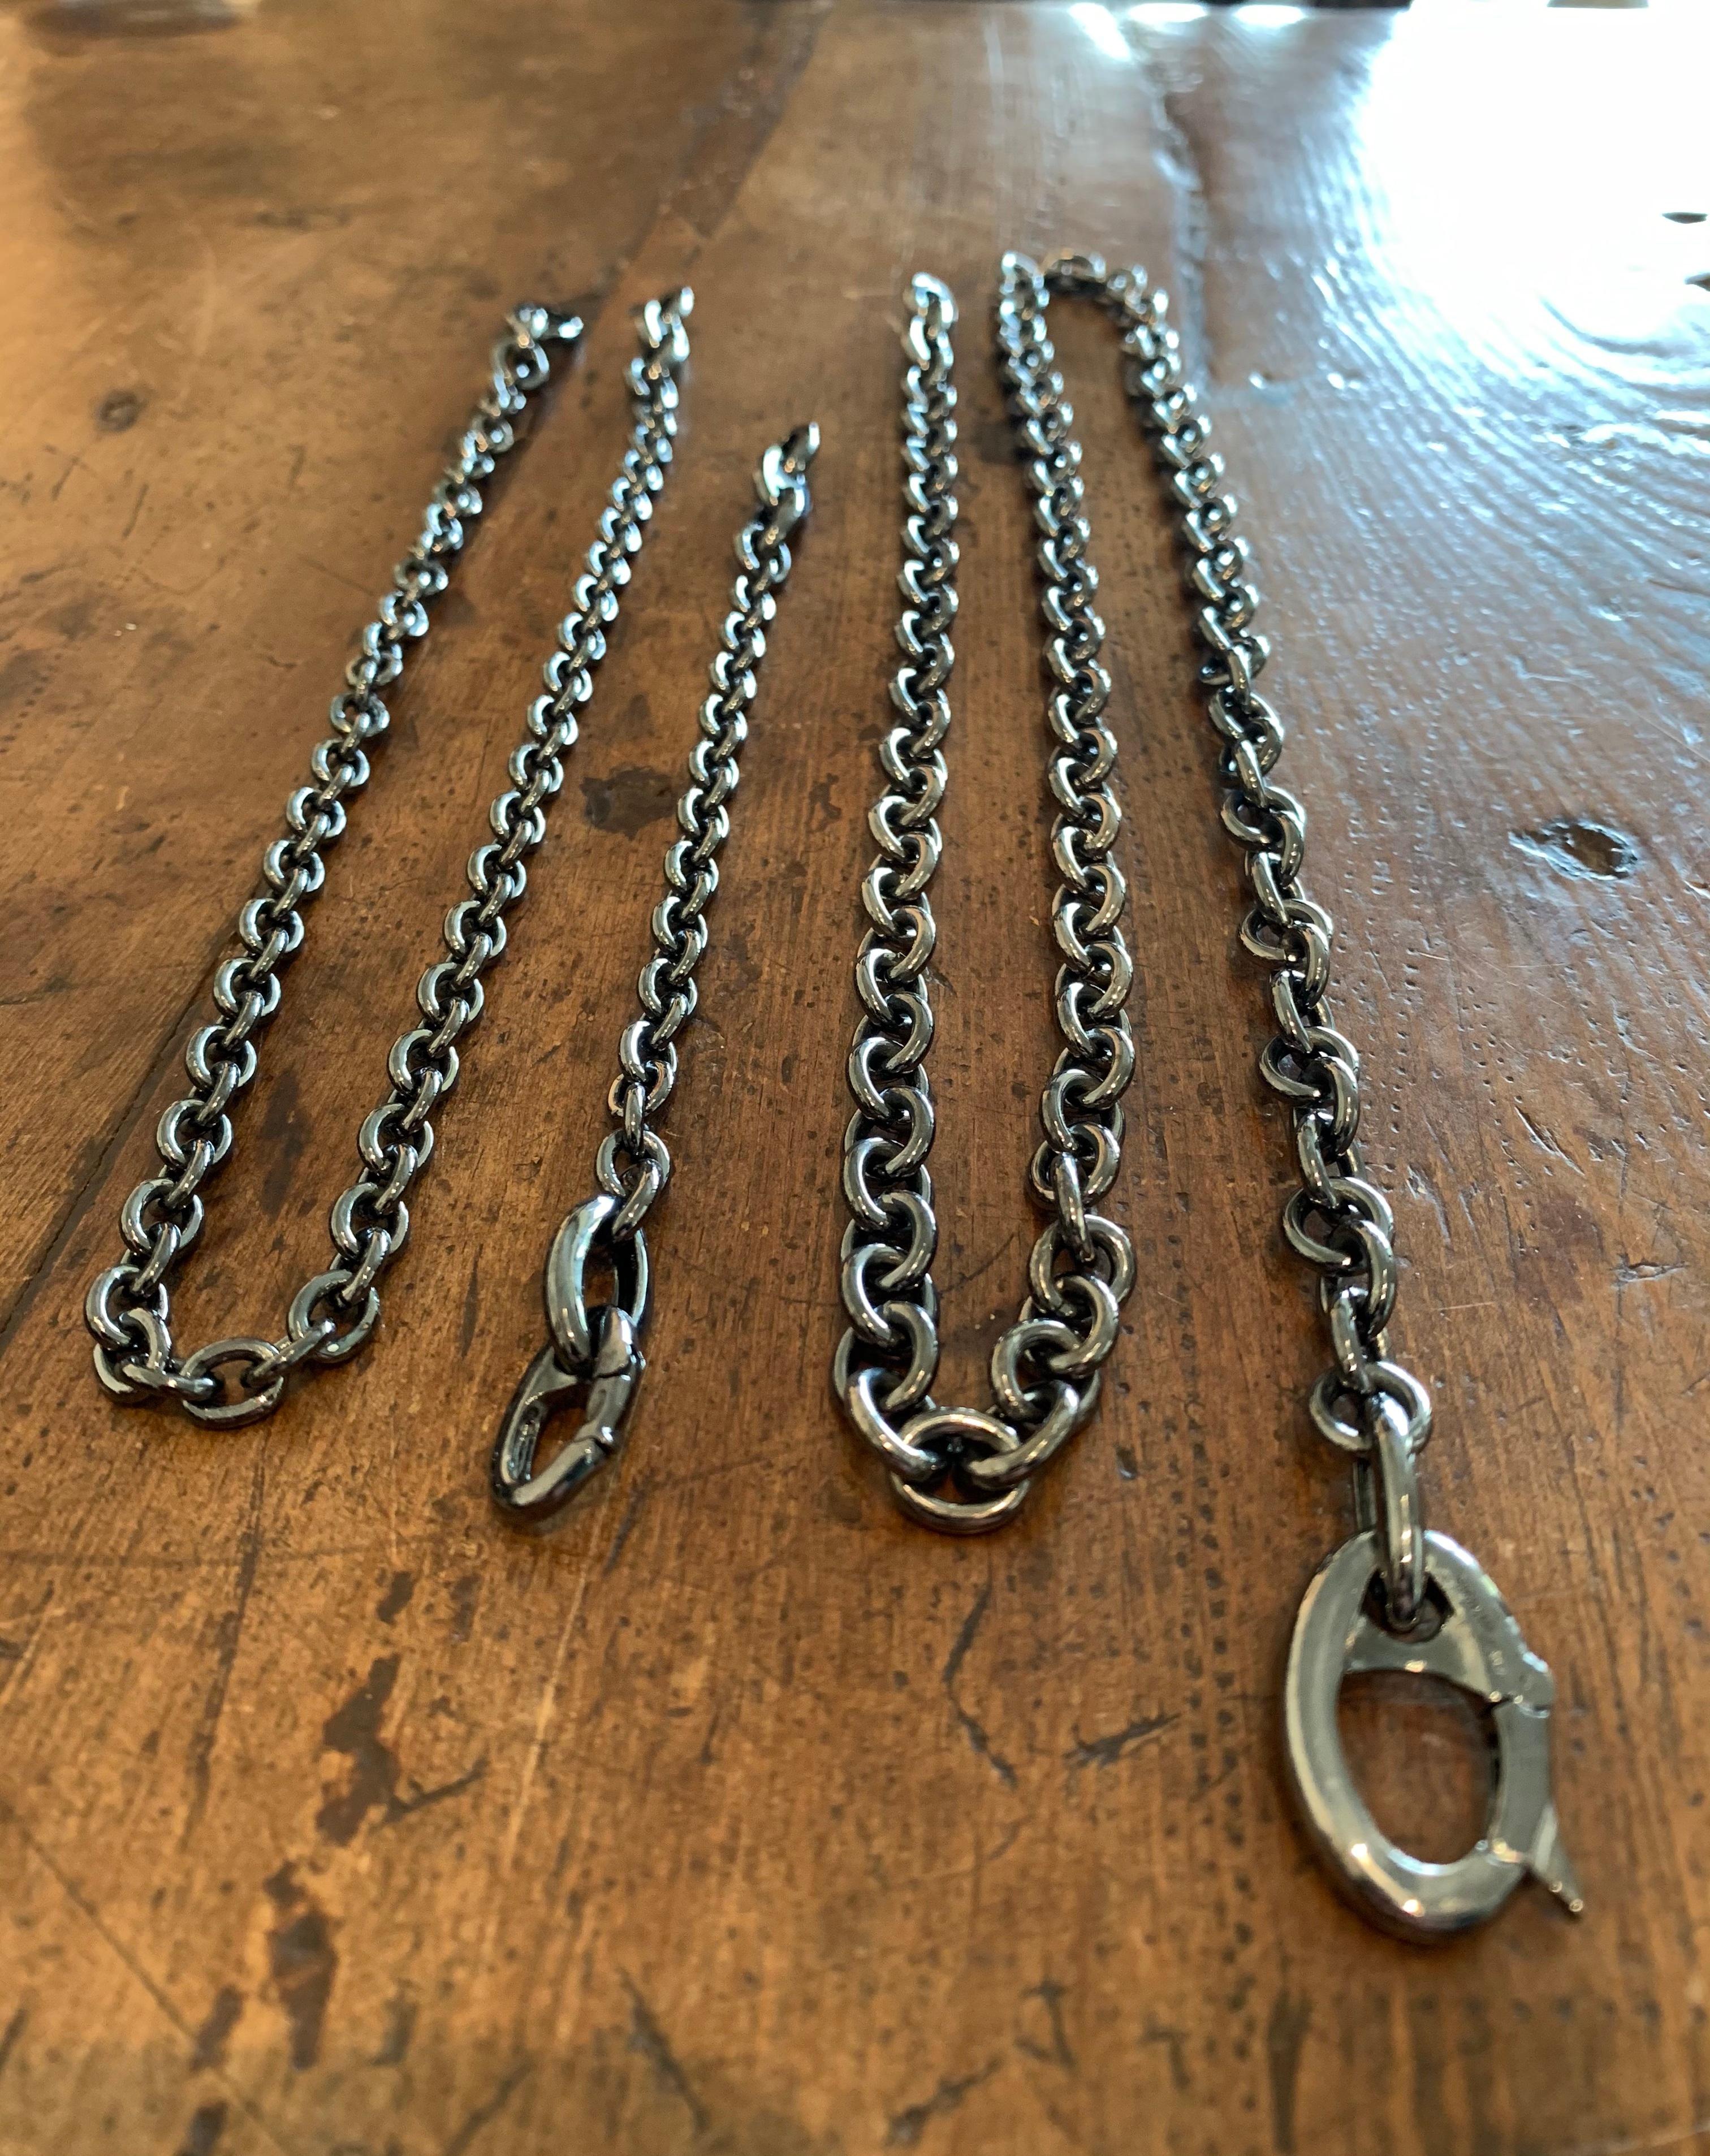 Originally designed across the millenium this fabulous chain with pendant is in dark rodium silver. Handcrafted in Italy, from Garavelli  STUDS SILVER NECKLACE collection.
Total lenght 18 inches - 46 cm 
From the creative genio of Luca Valerani,